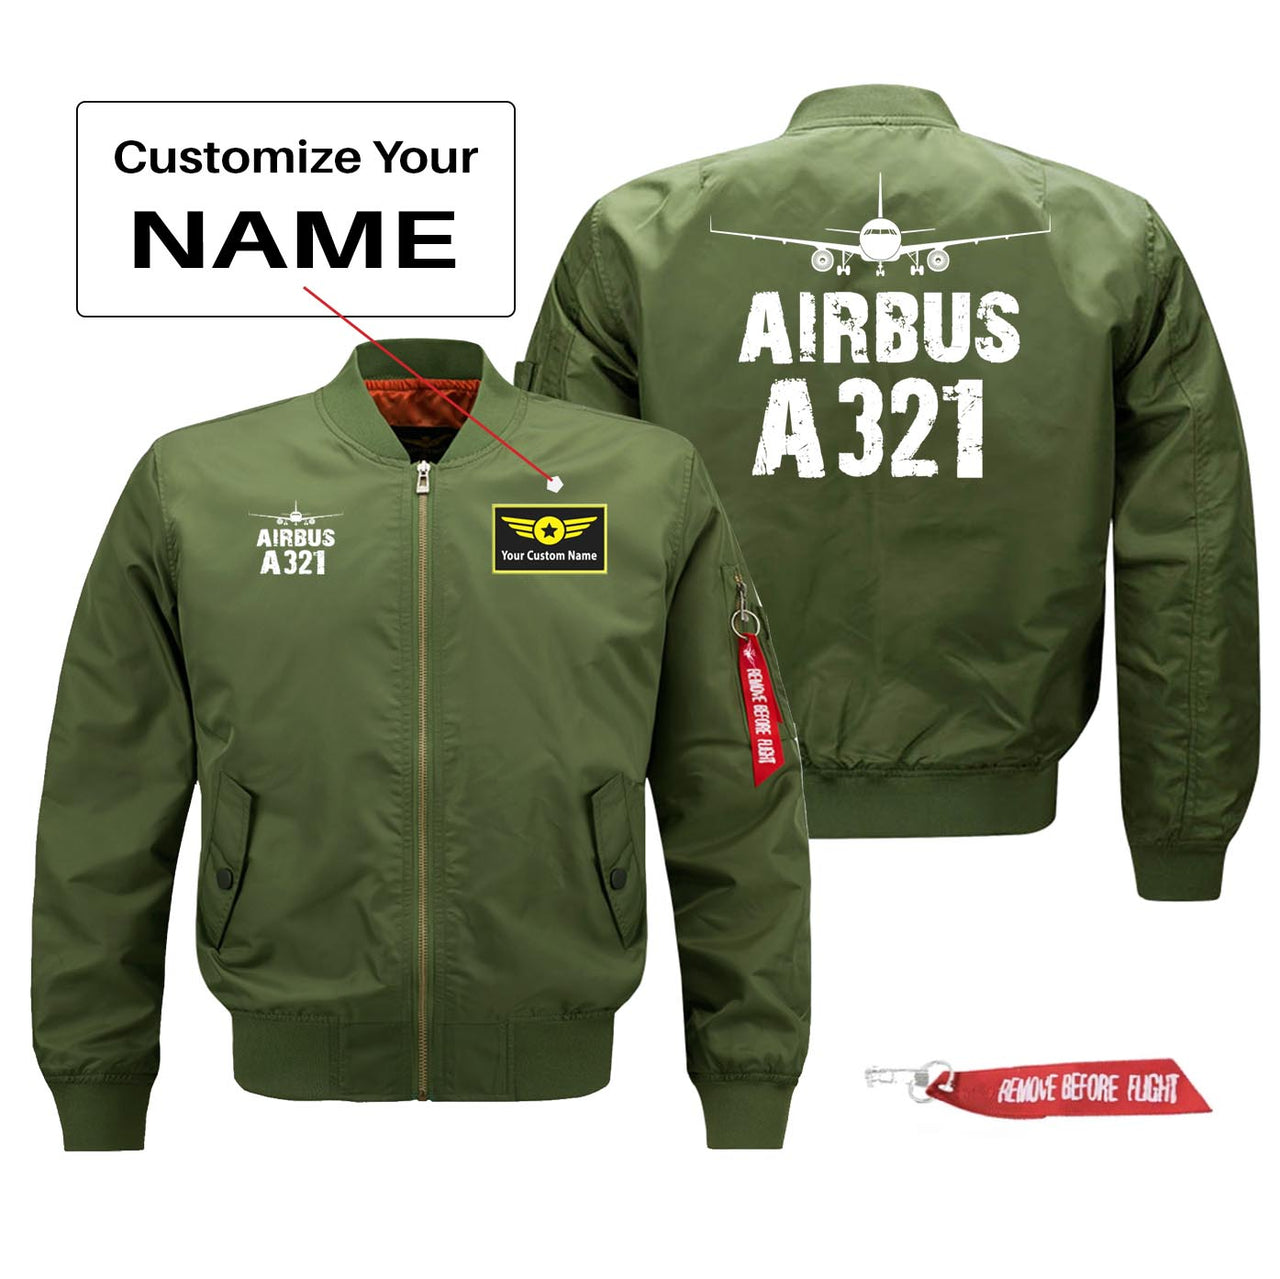 Airbus A321 Silhouette & Designed Pilot Jackets (Customizable)